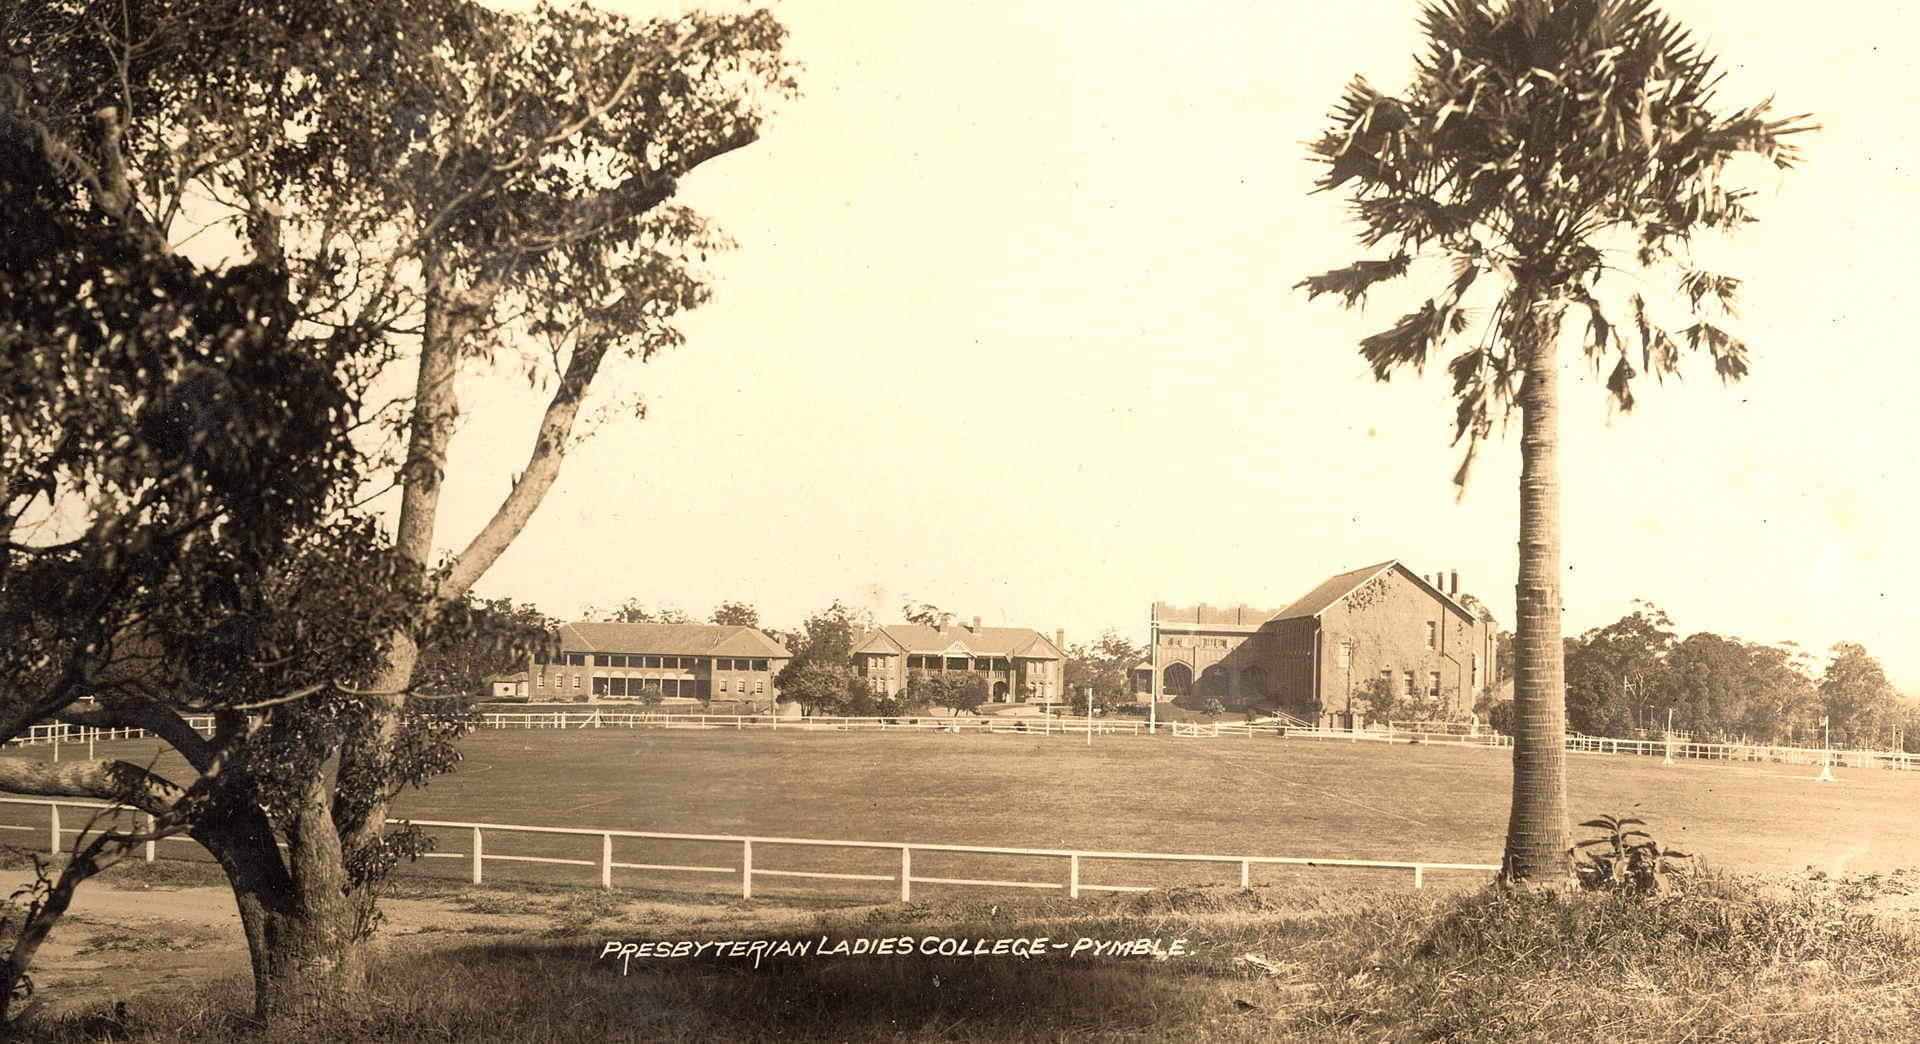 Presbyterian Ladies College, Pymble in the 1920's